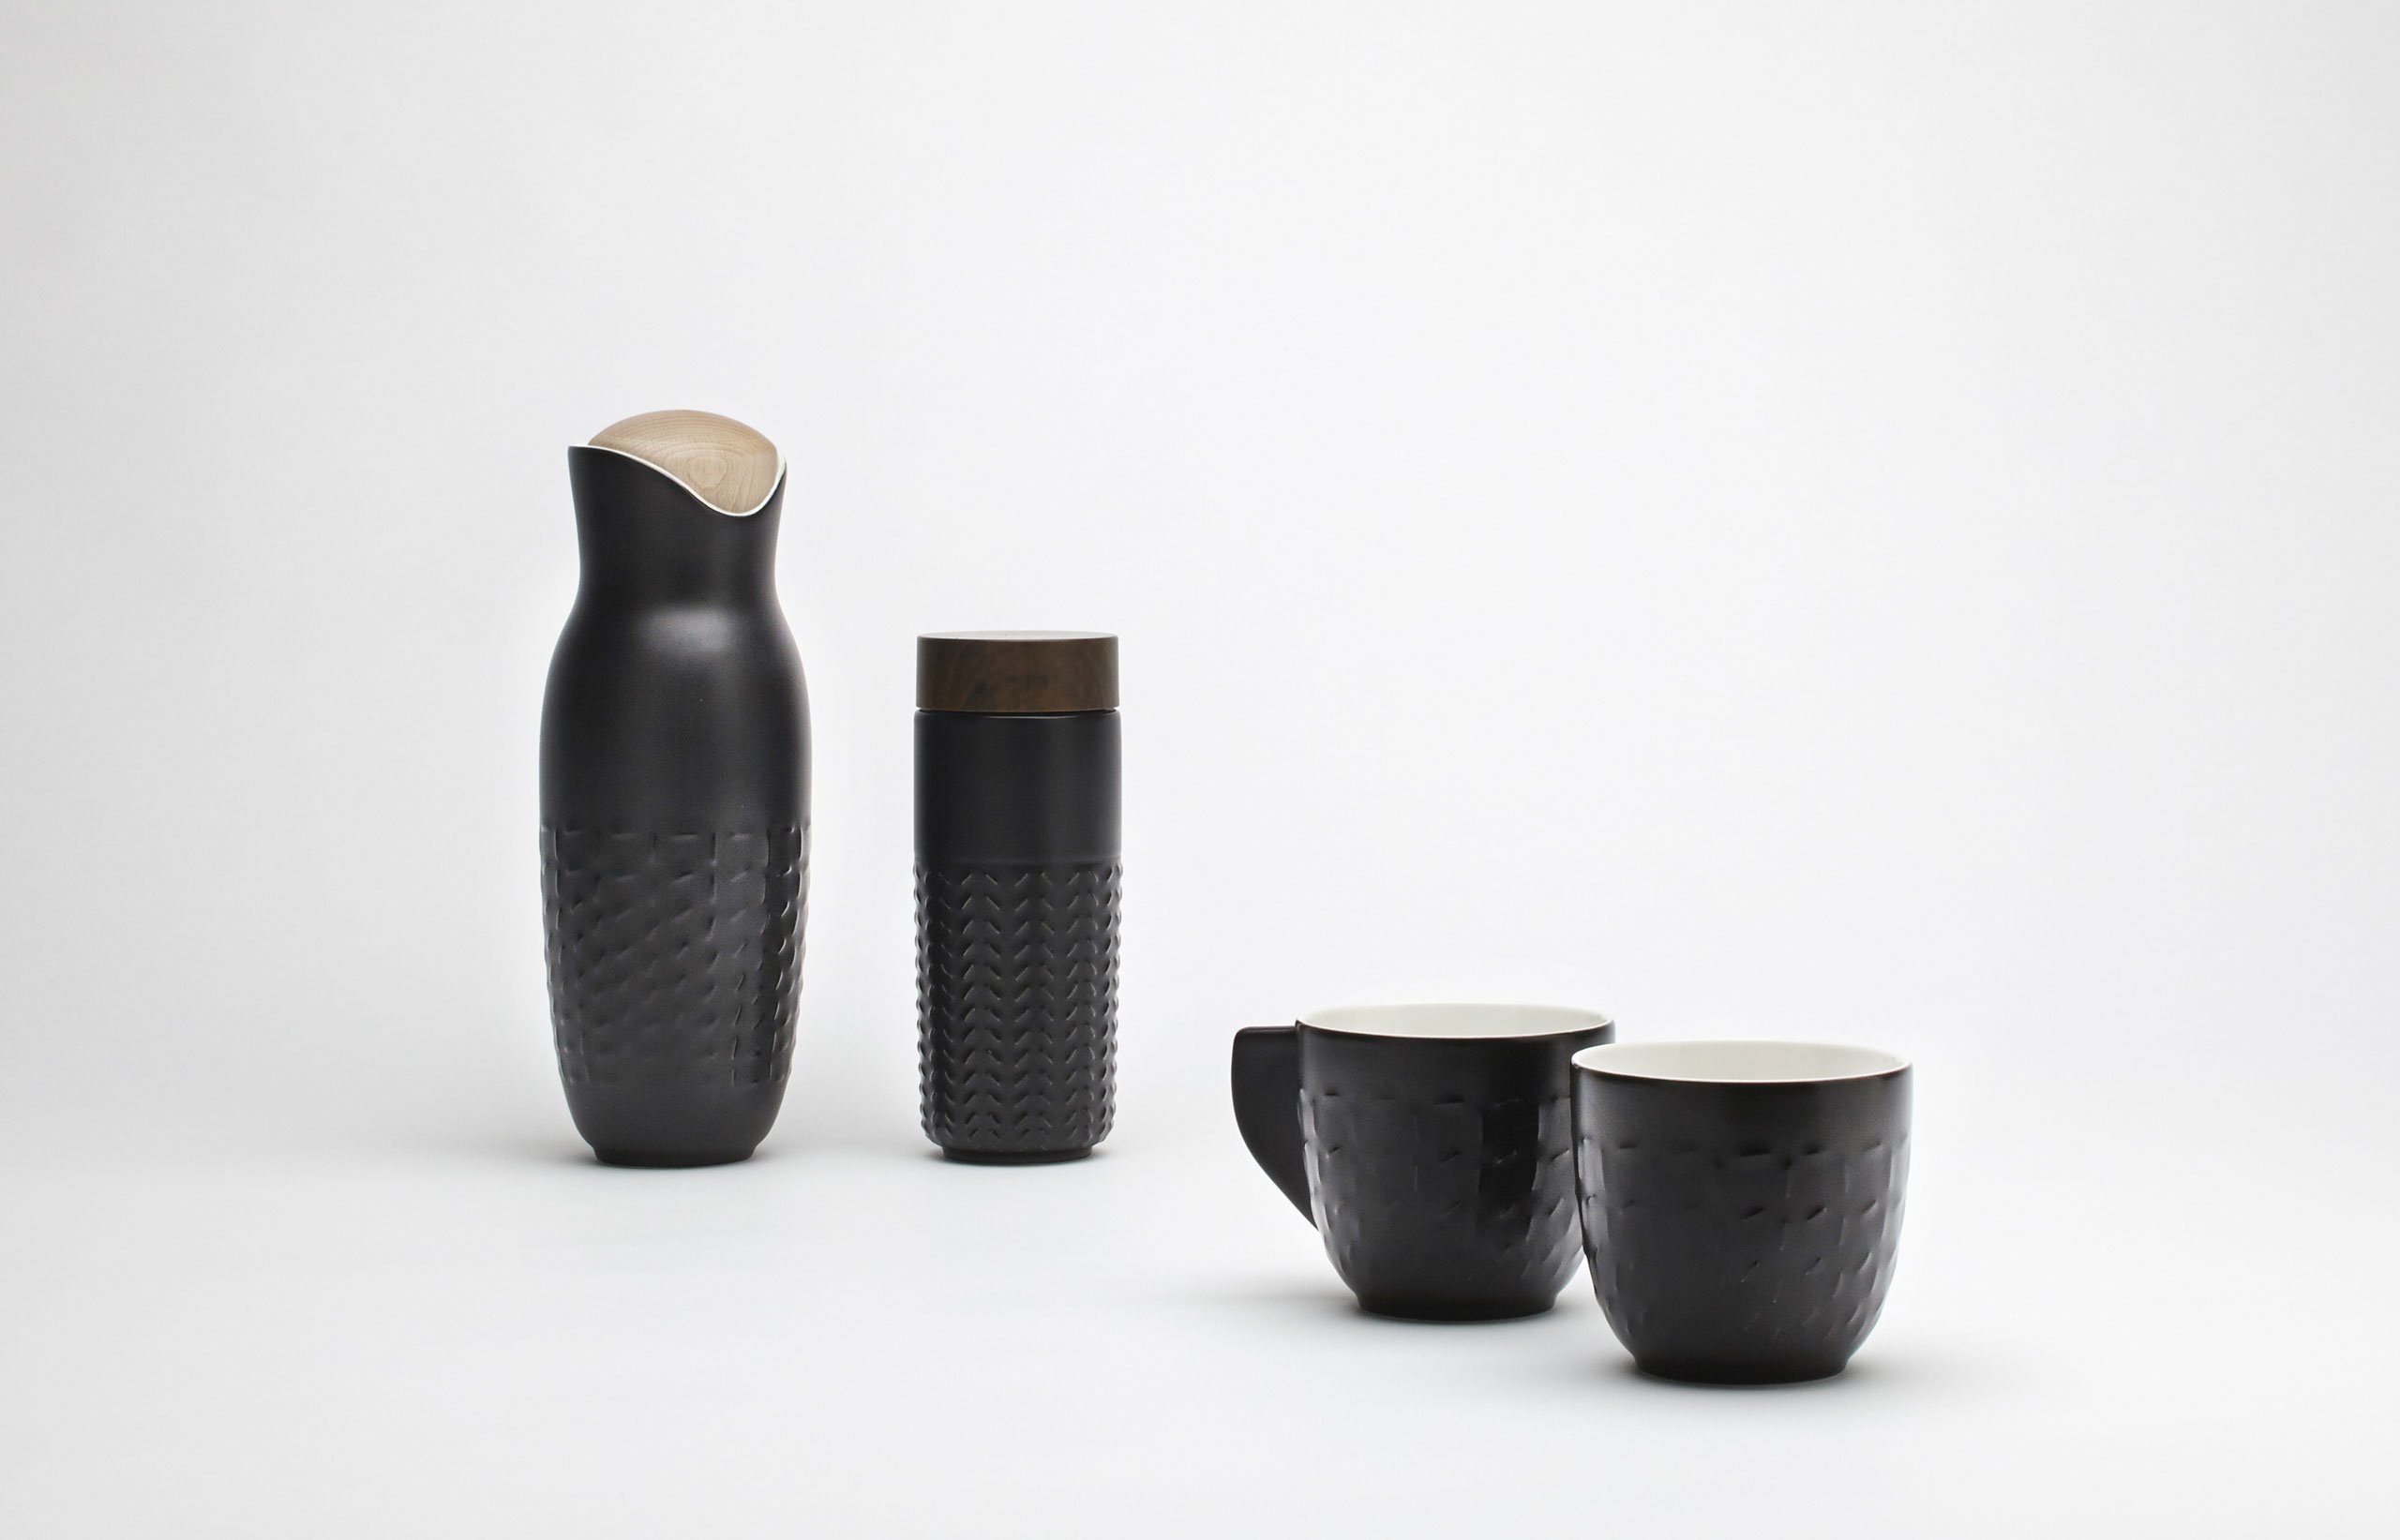 Urban Collection of ceramic tableware by Hangar Design Group for ACERA.